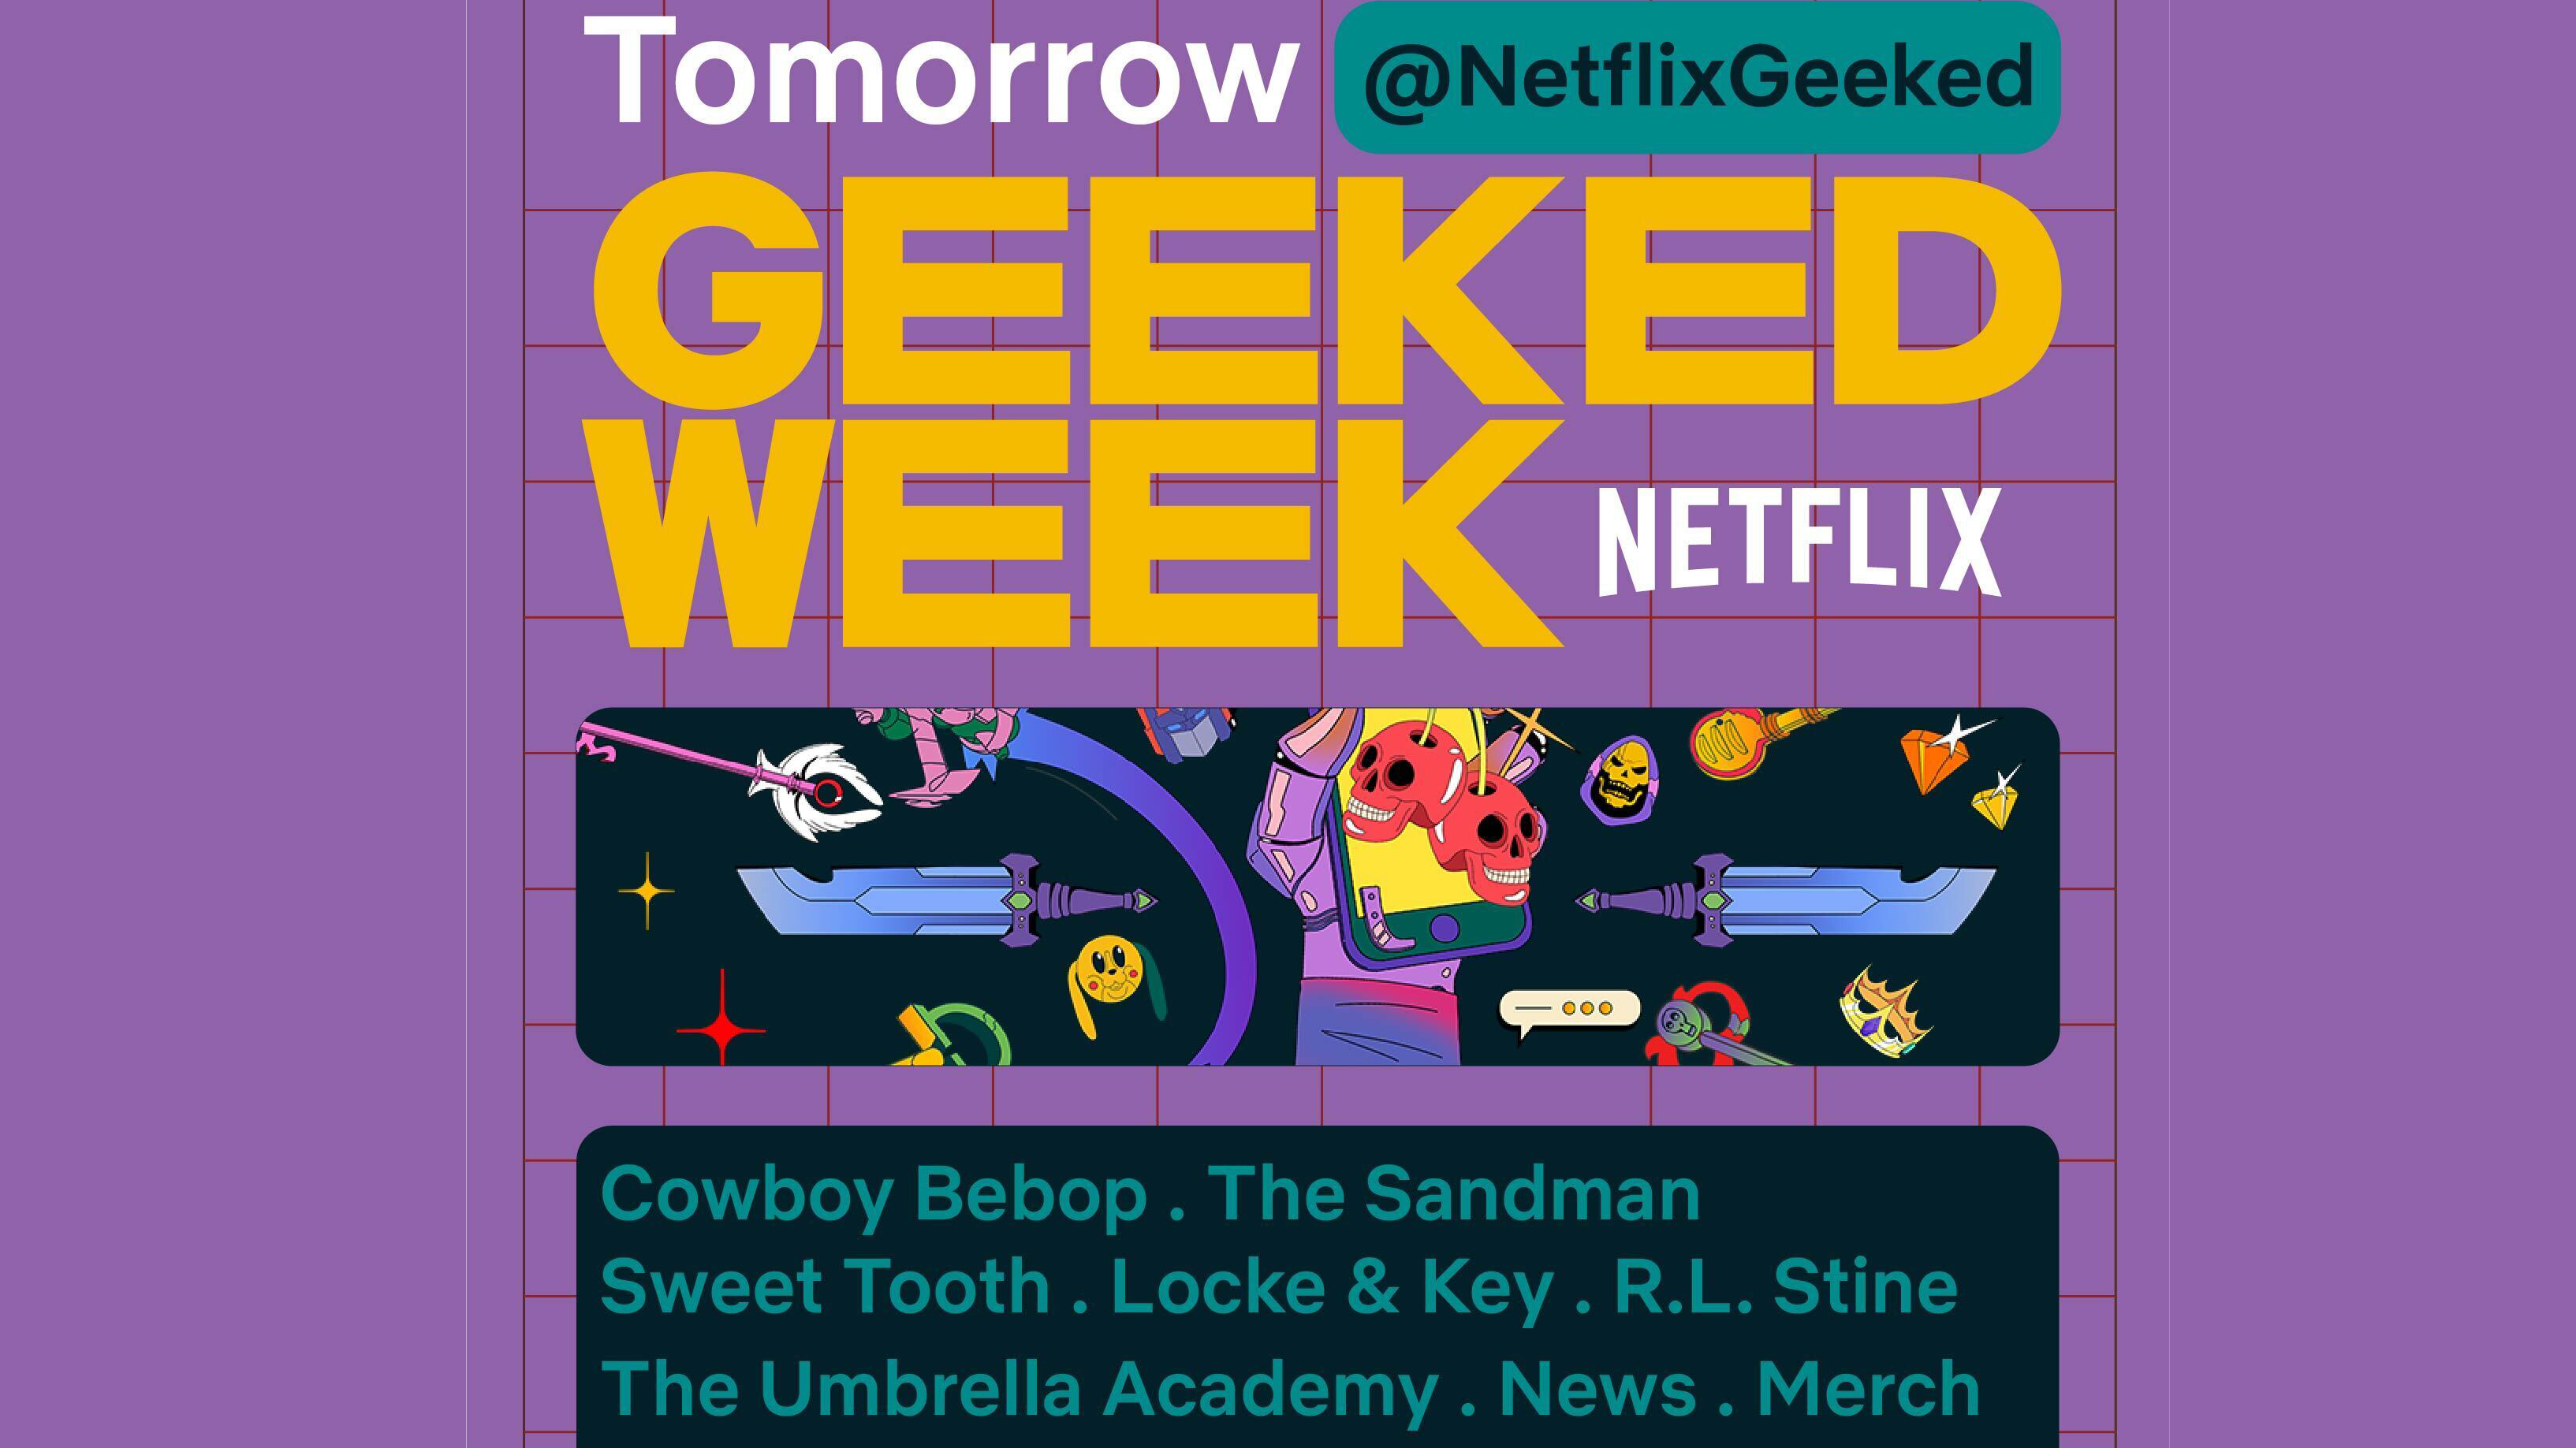 A preview of the content being posted on Day 2 of Netflix's Geeked Week